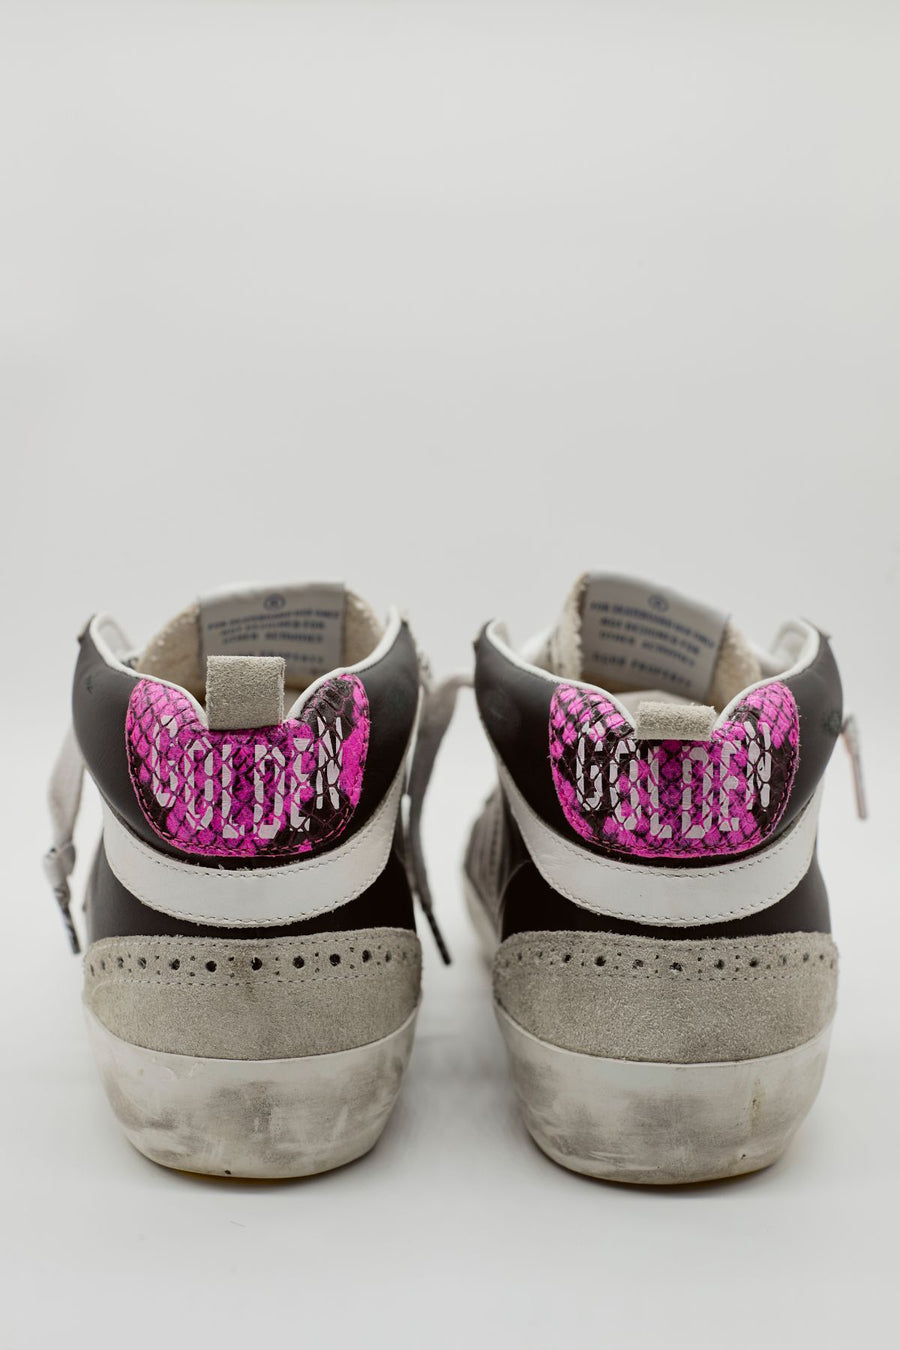 Neon Mid Star and Black Body Sneakers - Limited Edition